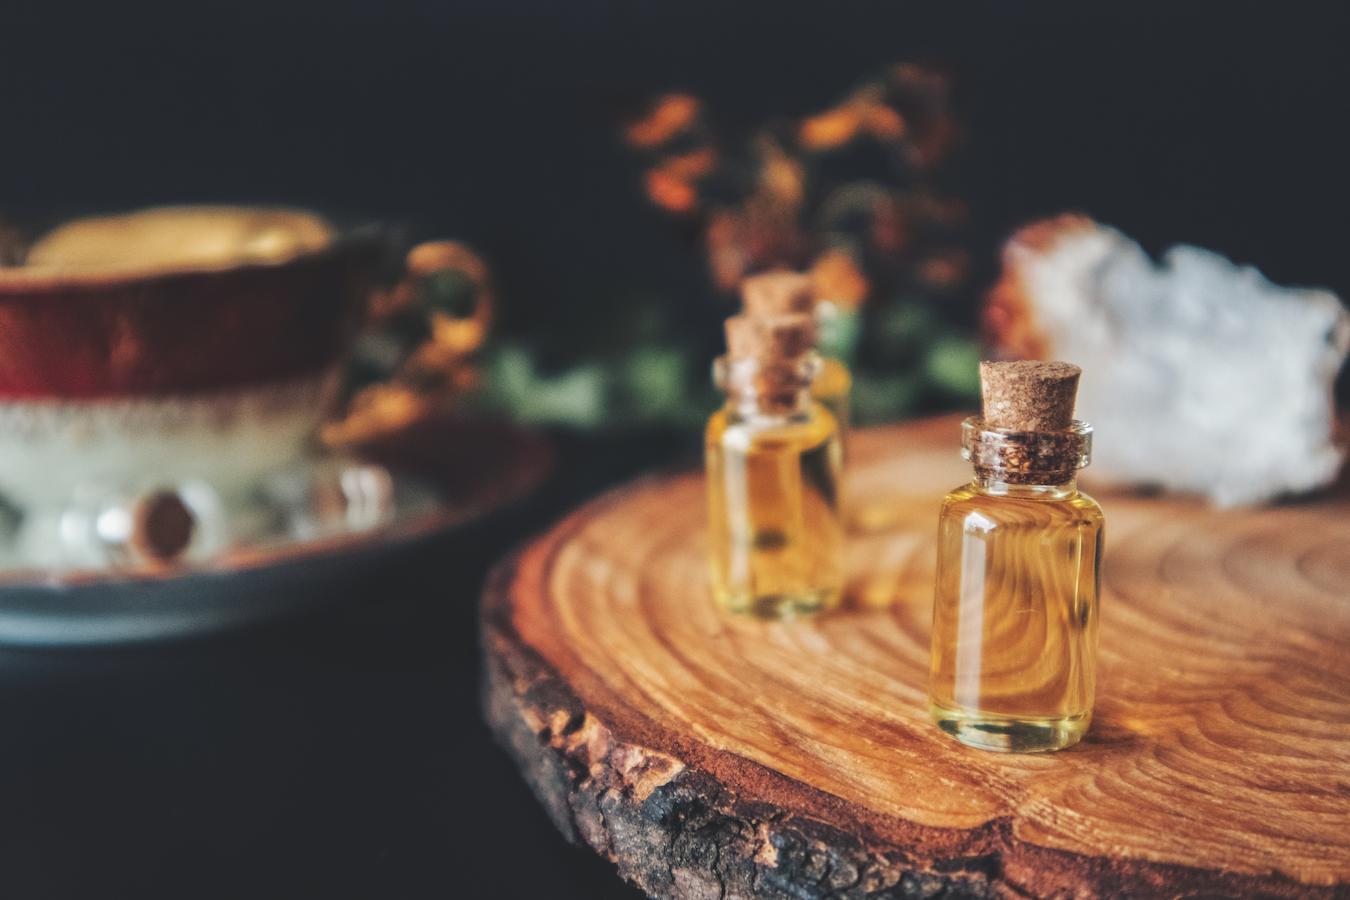 Mother's signature scent aphrodisiac properties favourite perfume helps enhance essential oils body odour therapeutic effects therapeutic effect main benefits of wearing a perfume enhances mood